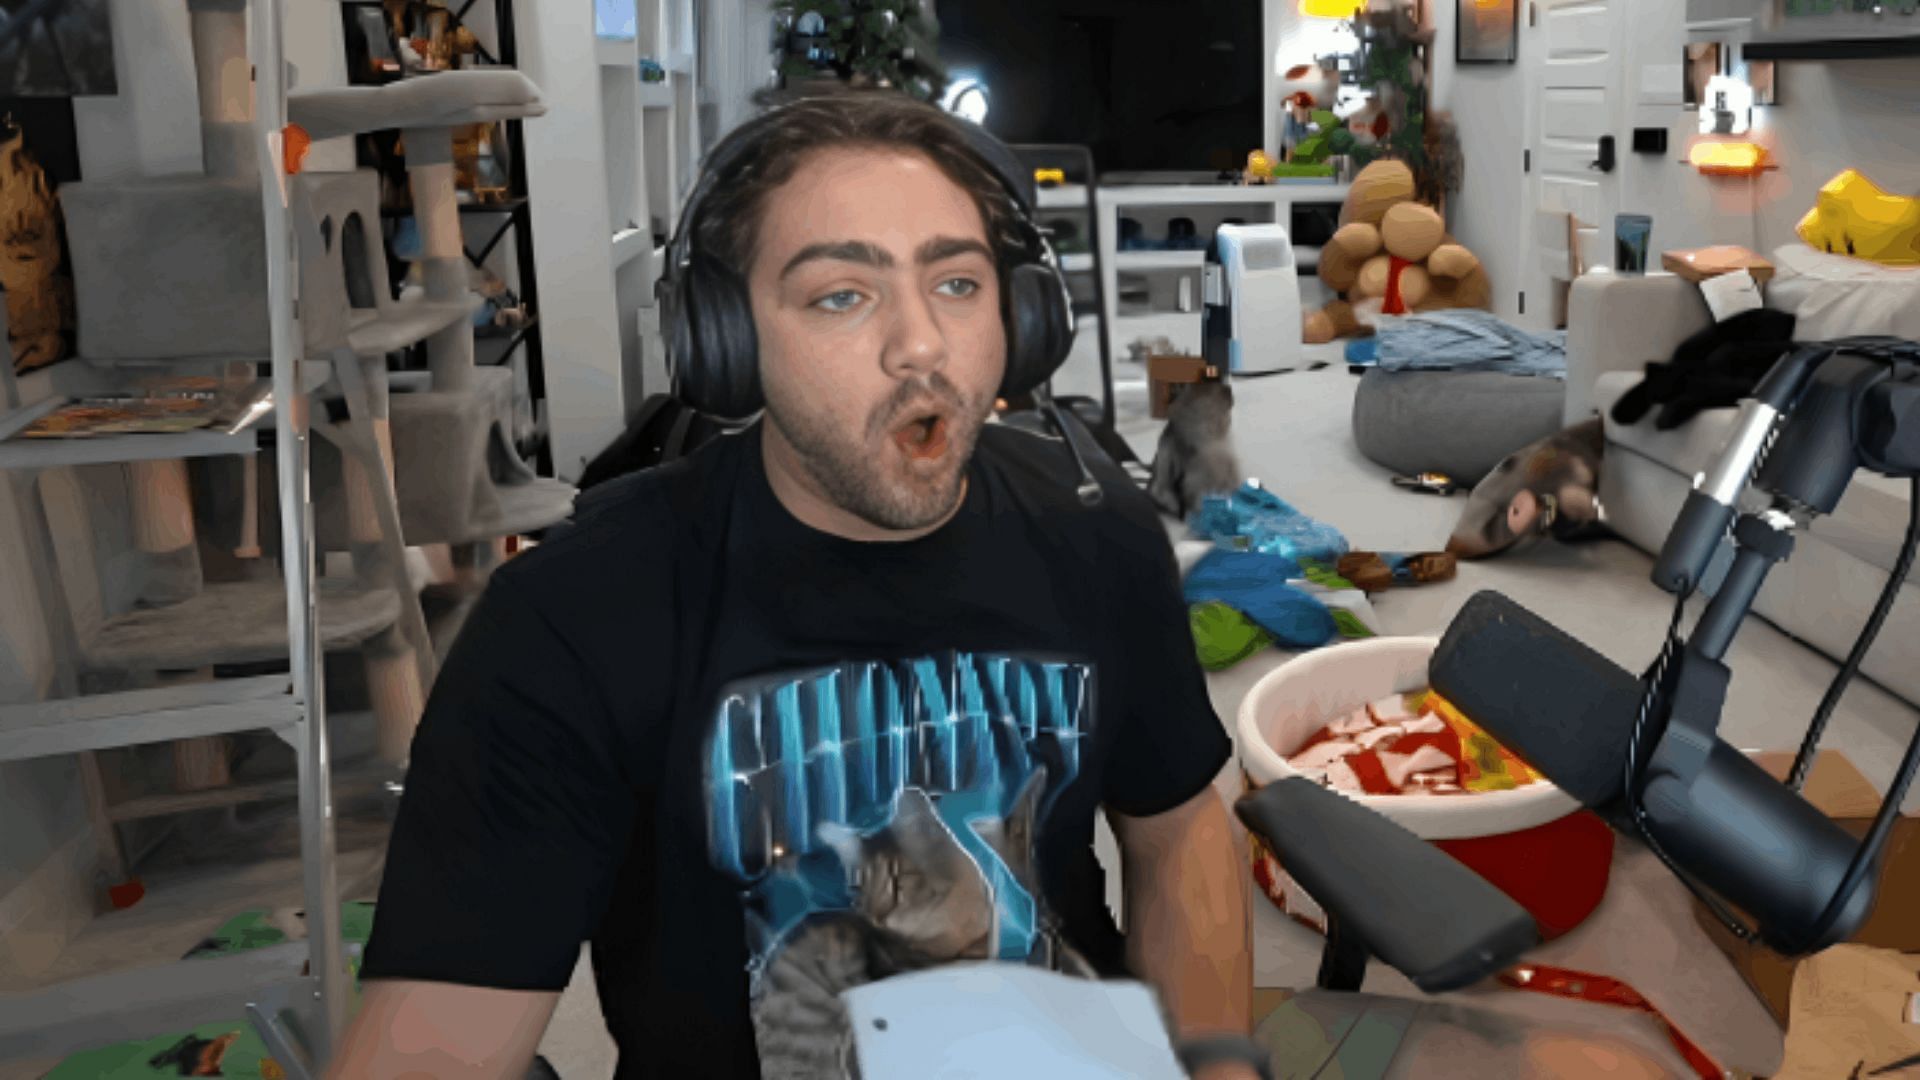 Mizkif finds out his shampoo allegedly causes hair loss. (Image via Mizkif/Twitch)